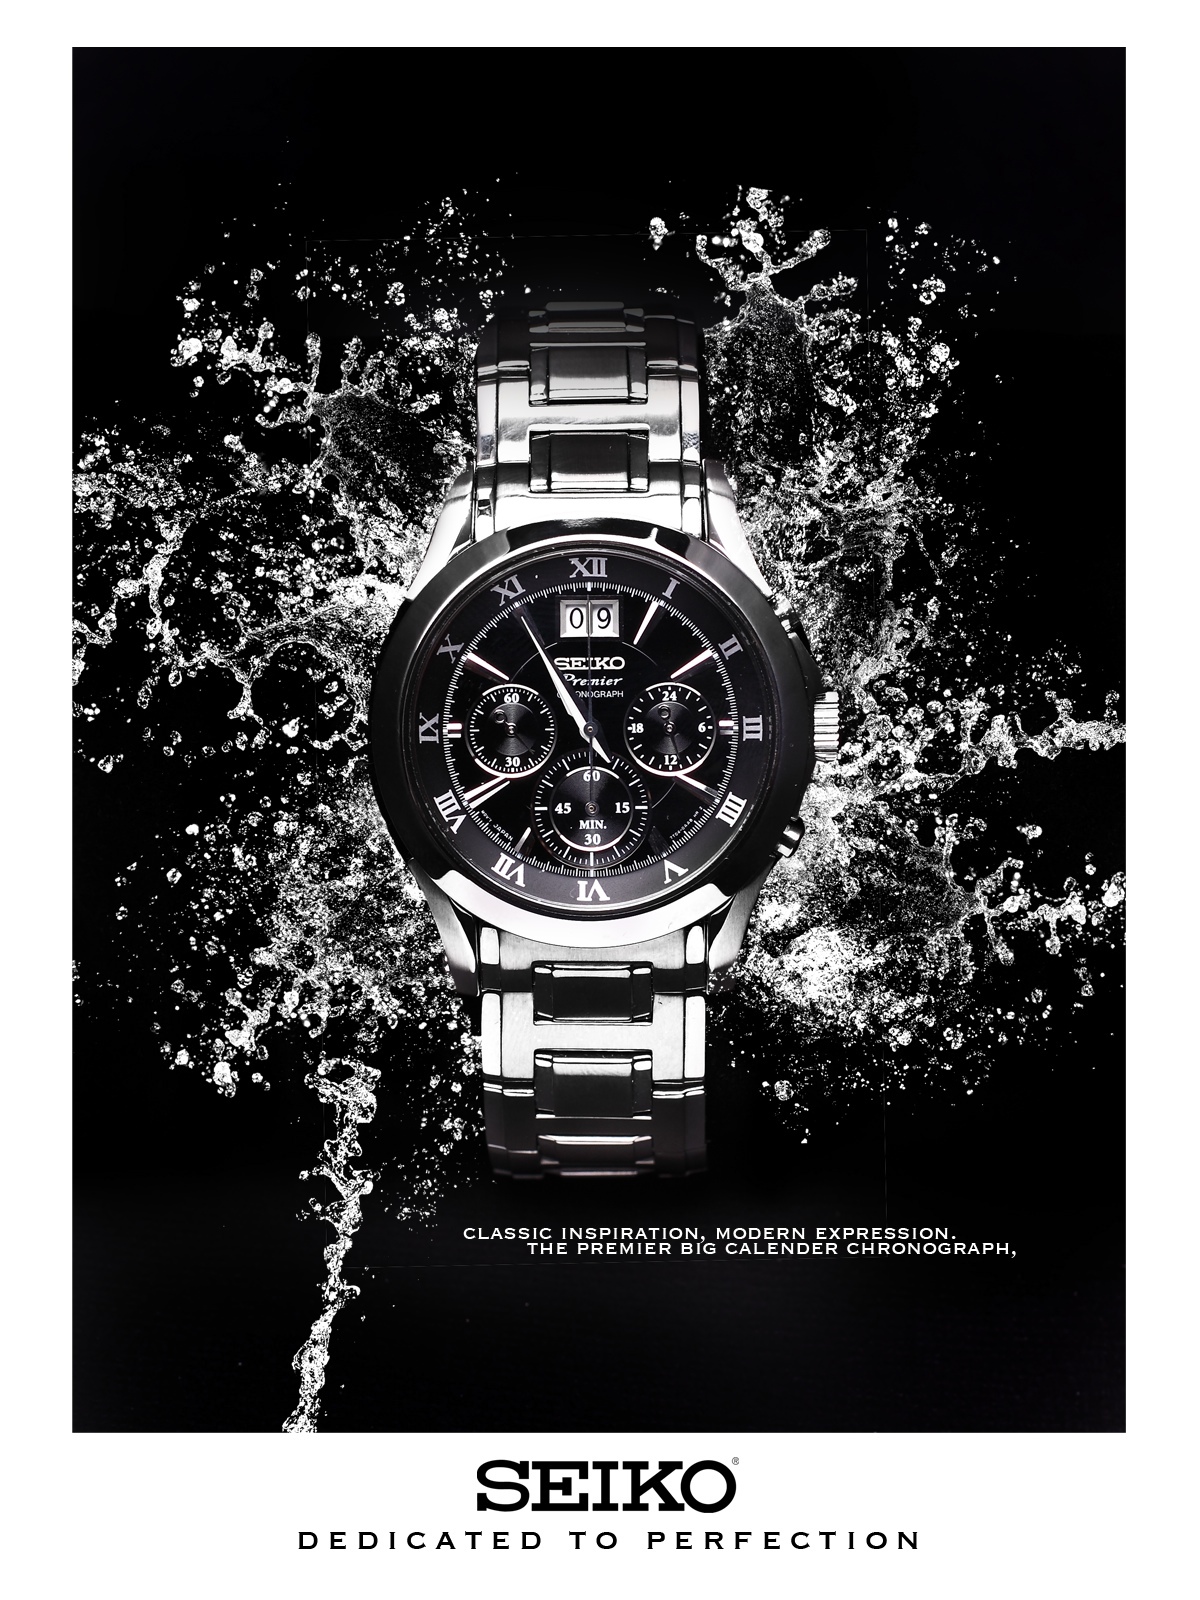 Casio Chronograph Watches casio watch Product Photography digital imaging 